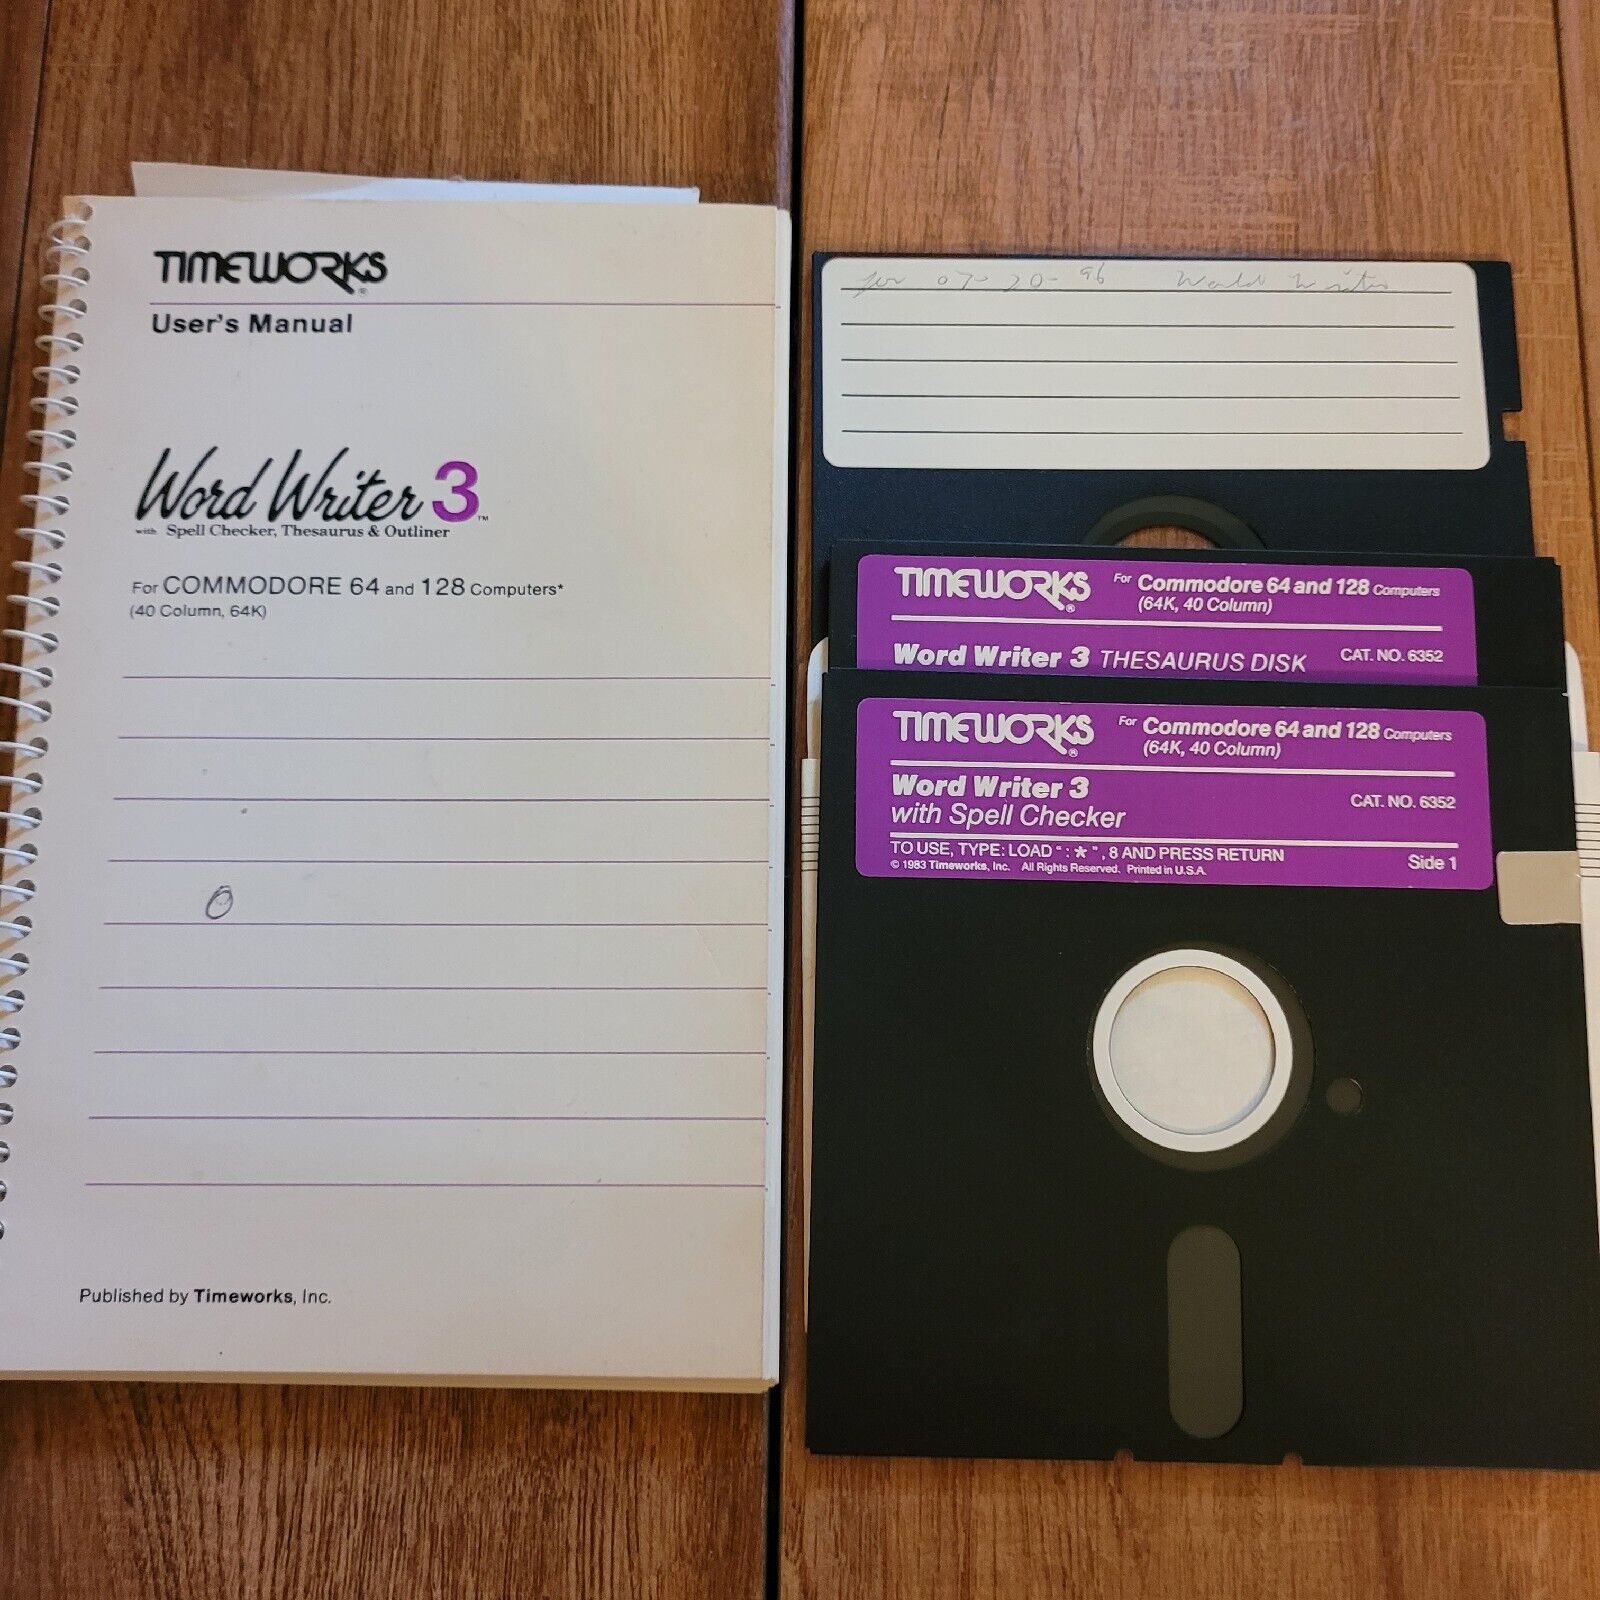 Word Writer 3 Discs and Manual TIMEWORKS 1982 Vintage Commodore 64 128 Computer 